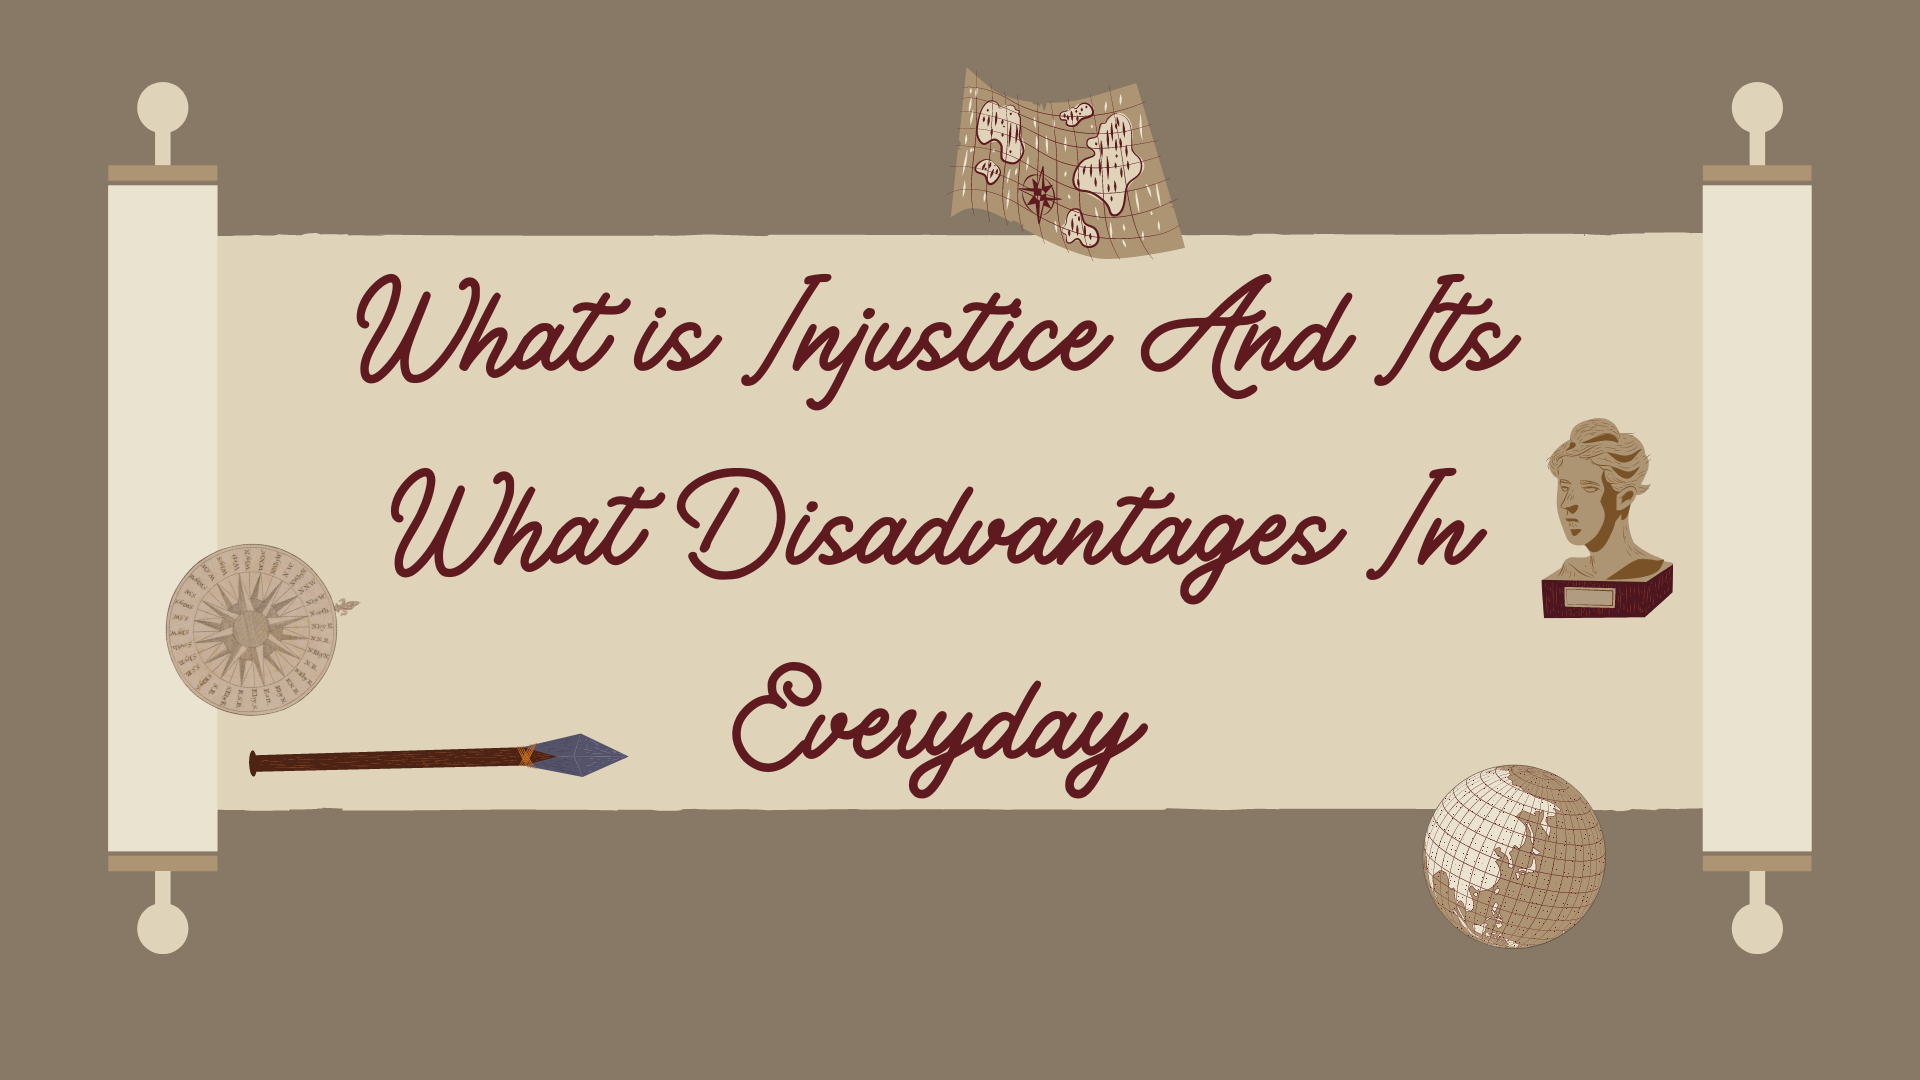 What-is-Injustice-And-Its-What-Disadvantages-In-Everyday_1